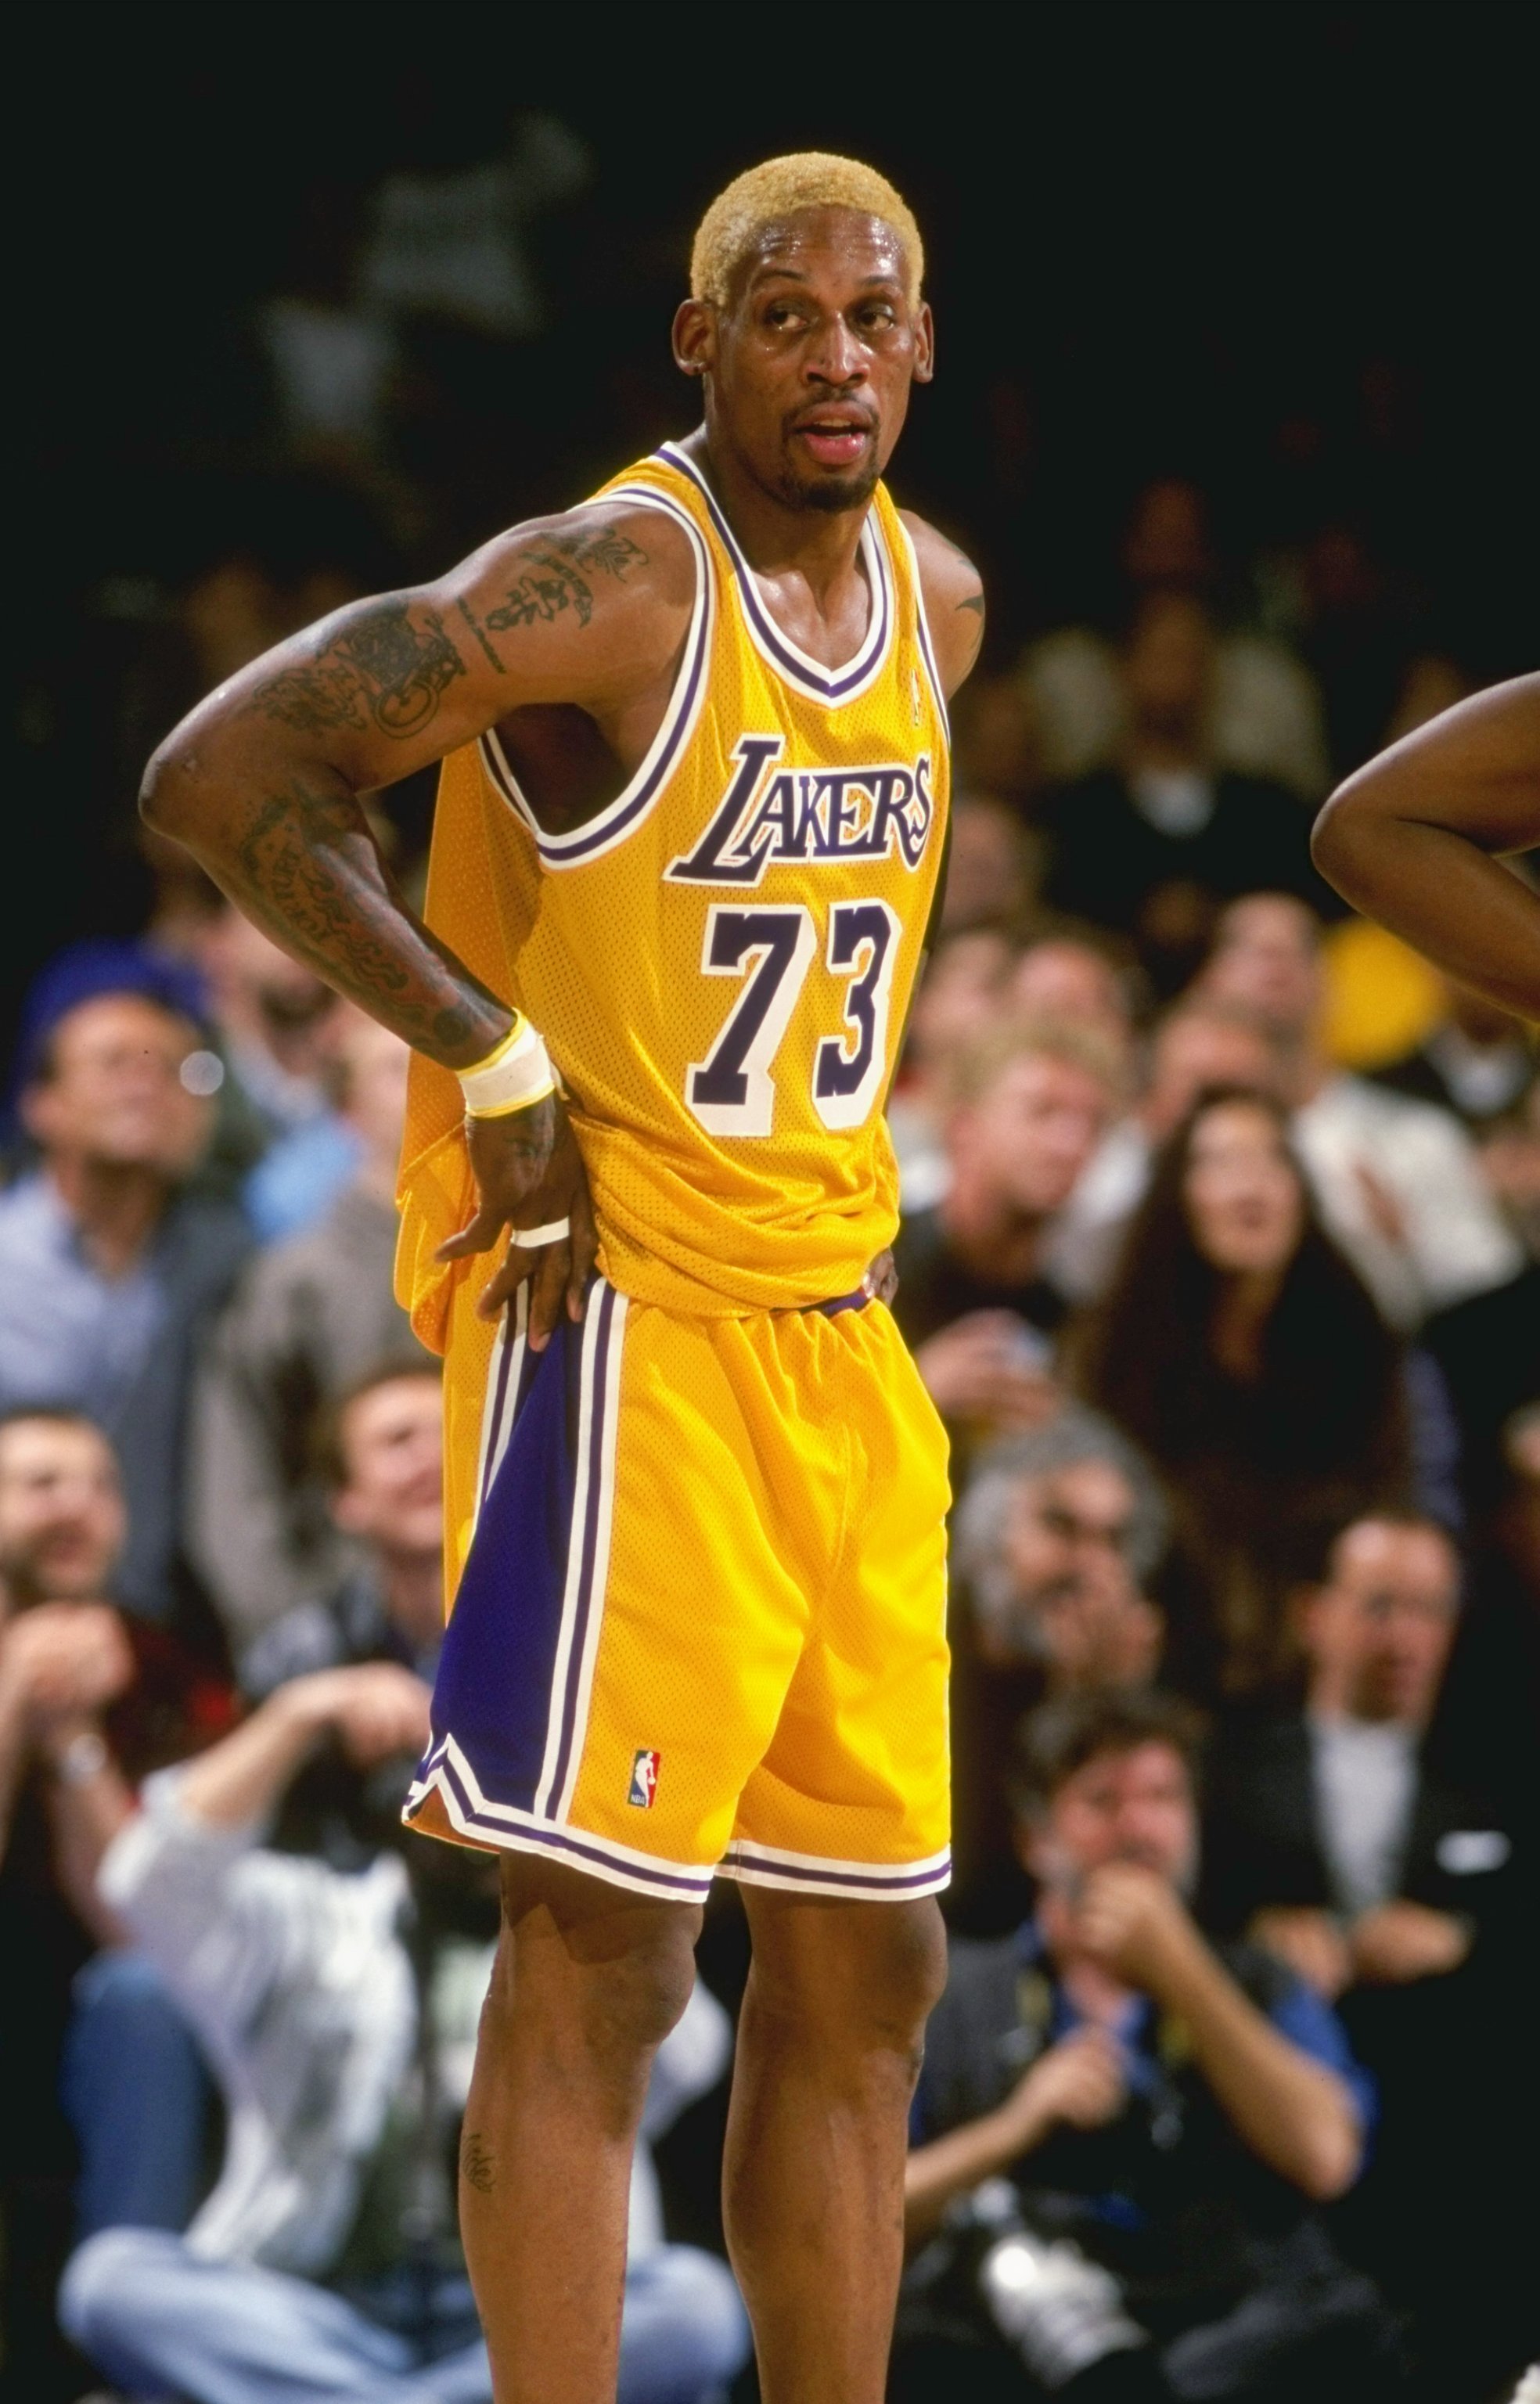 6 Apr 1999: Dennis Rodman #73 of the Los Angeles Lakers looks on the court during the game against the Utah Jazz at the Great Western Forum in Inglewood, California. The Jazz defeated the Lakers 106-93.   Mandatory Credit: Todd Warshaw  /Allsport